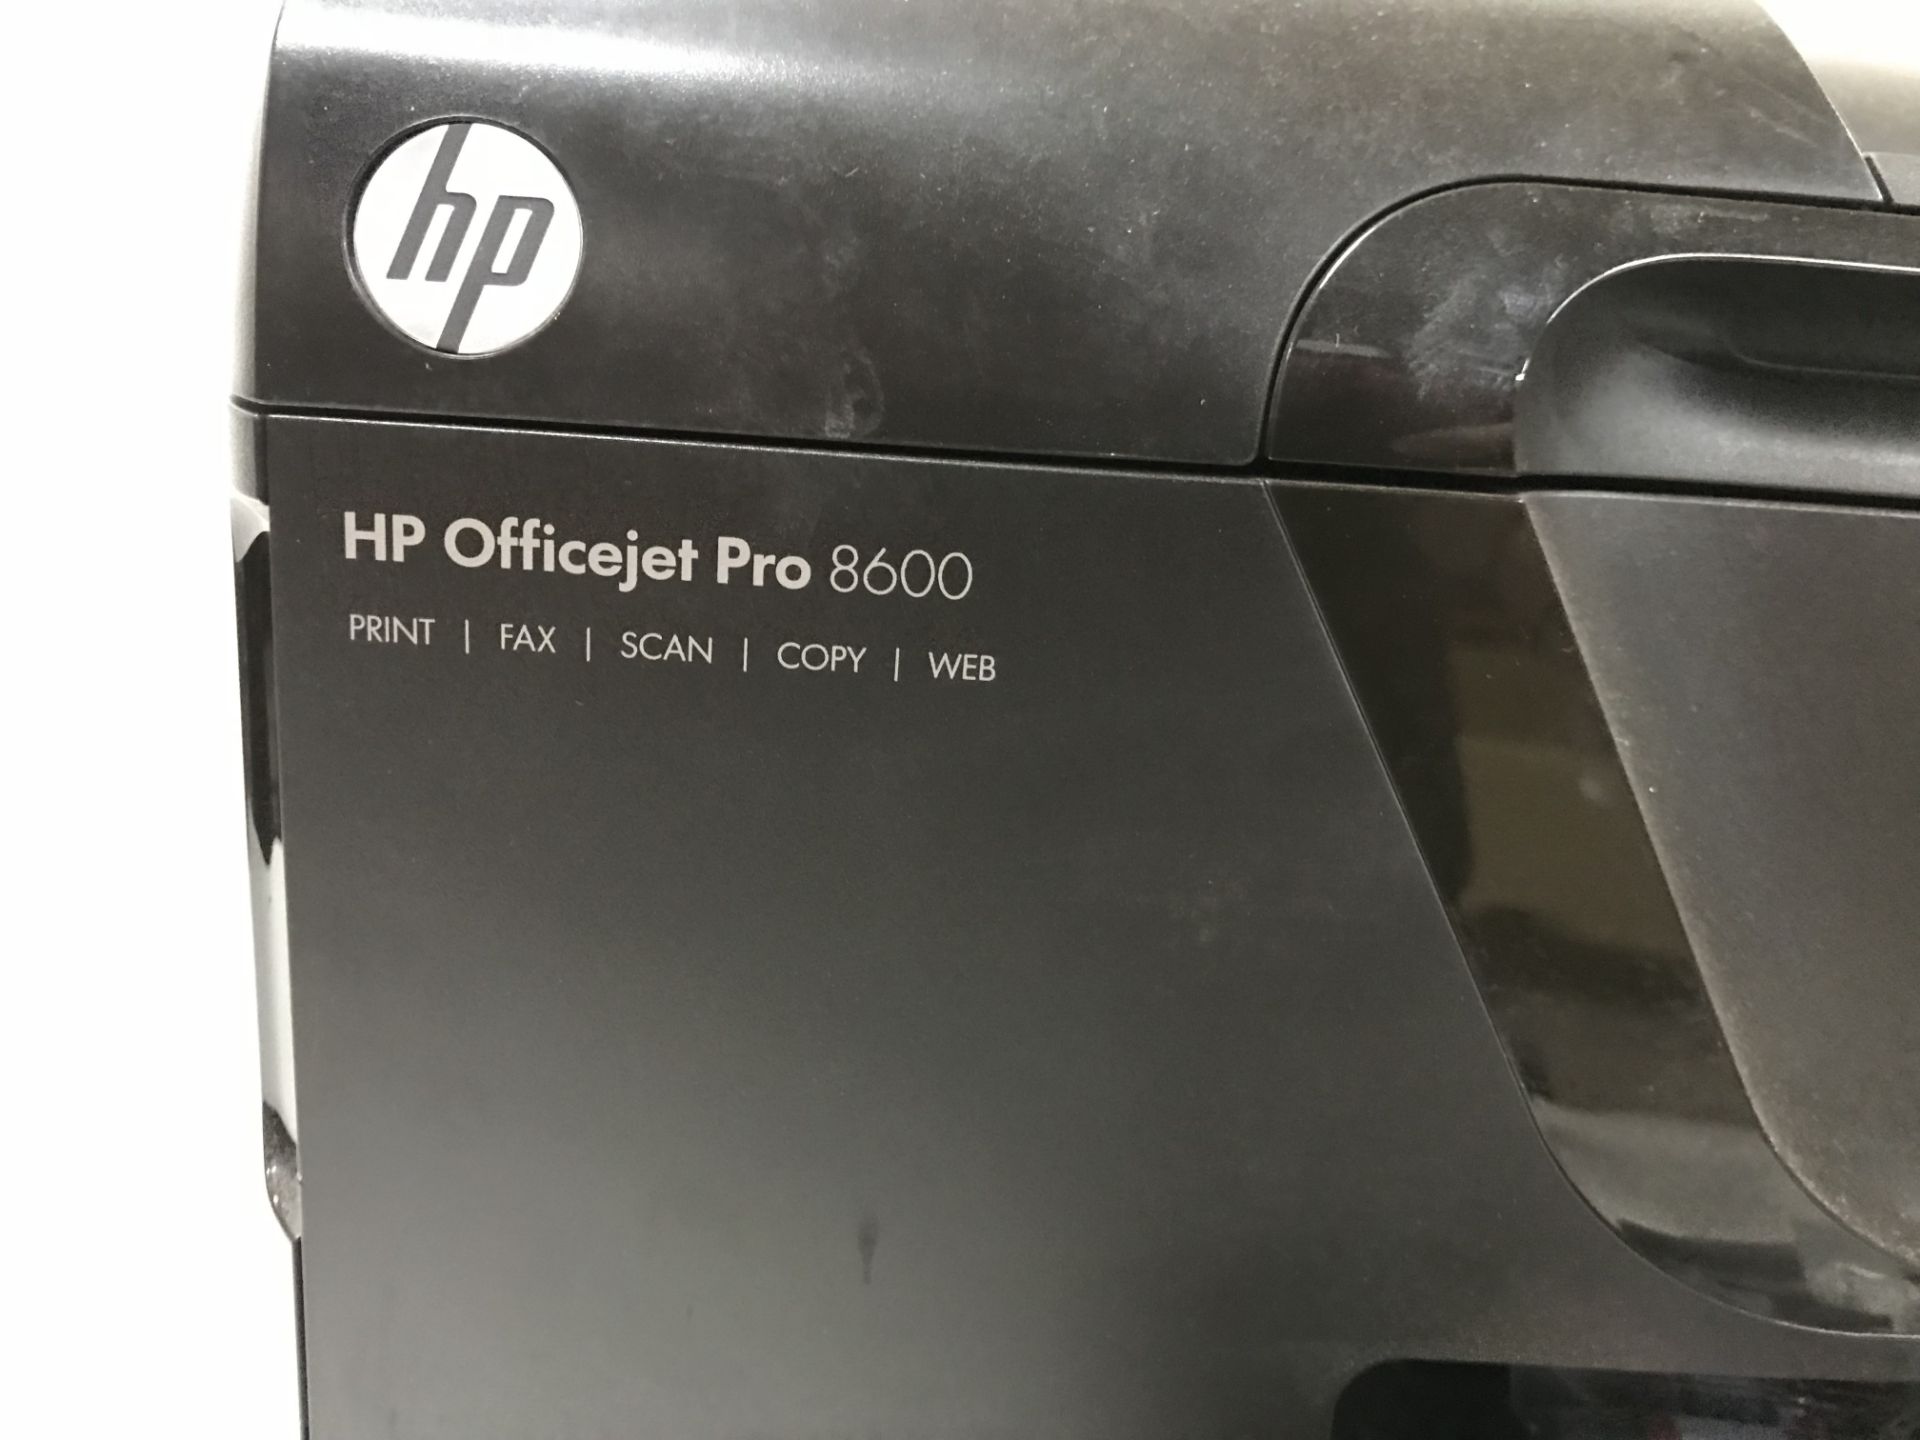 Hp Officejet Pro 8600 e-All-in-One Printer - Image 3 of 5